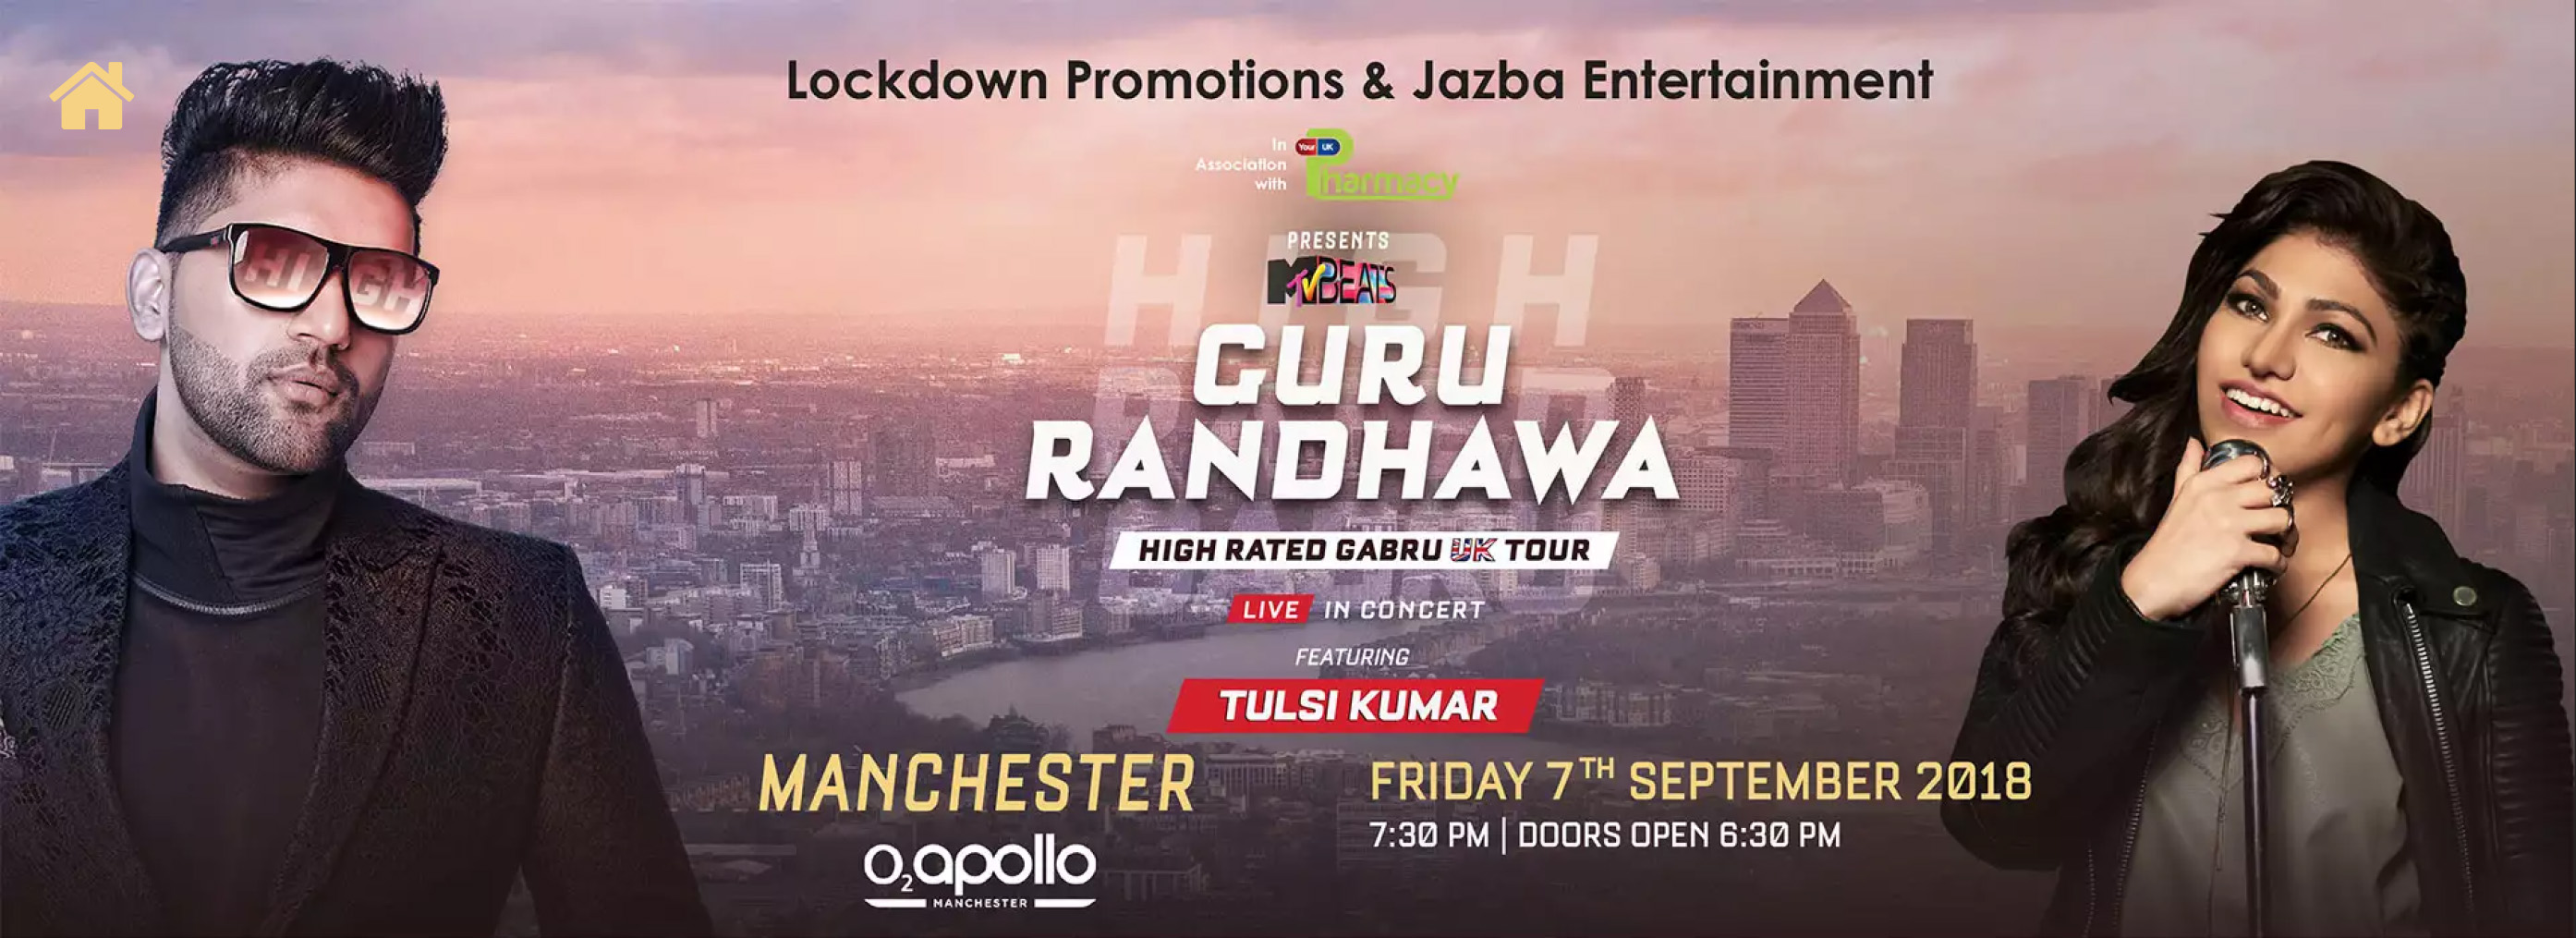 #GuruRandhawa Live for the first time in #Manchester on *7th September 2018* at #O2ApolloManchester. Feat. #TulsiKumar and Hosted by #NoreenKhan #LagdiLahoreDiAh #Highratedgabru